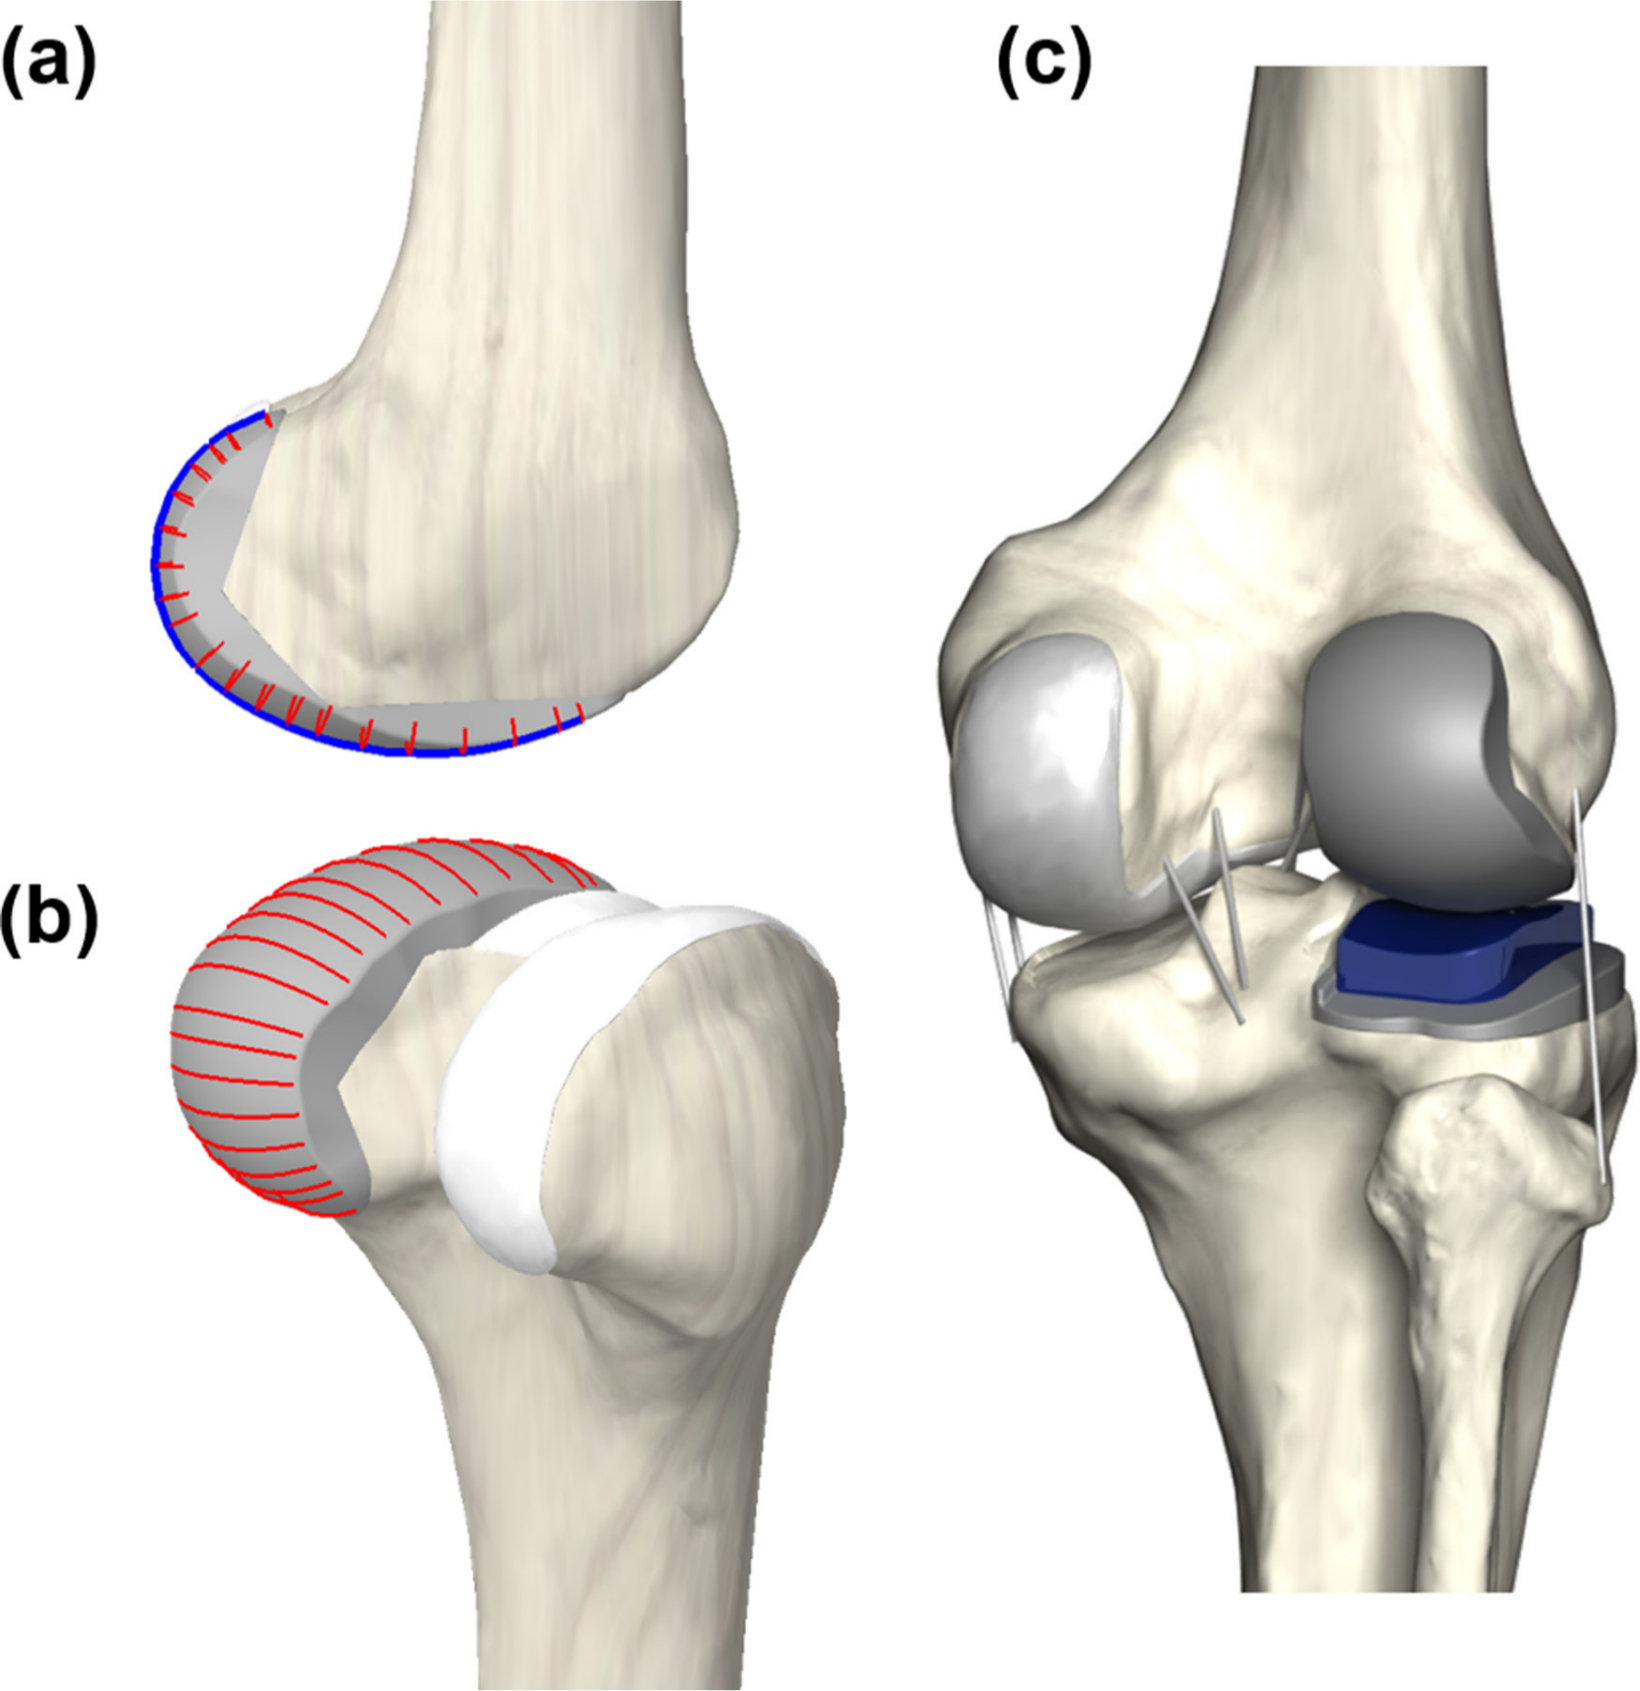 Fig. 1 
            Design process of patient-specific unicompartmental knee: a) spline curves used to model the femoral component; b) polyethylene insert that provides an anatomical fit and a perfect coverage; and c) patient-specific unicompartmental knee arthroplasty (UKA) model design.
          